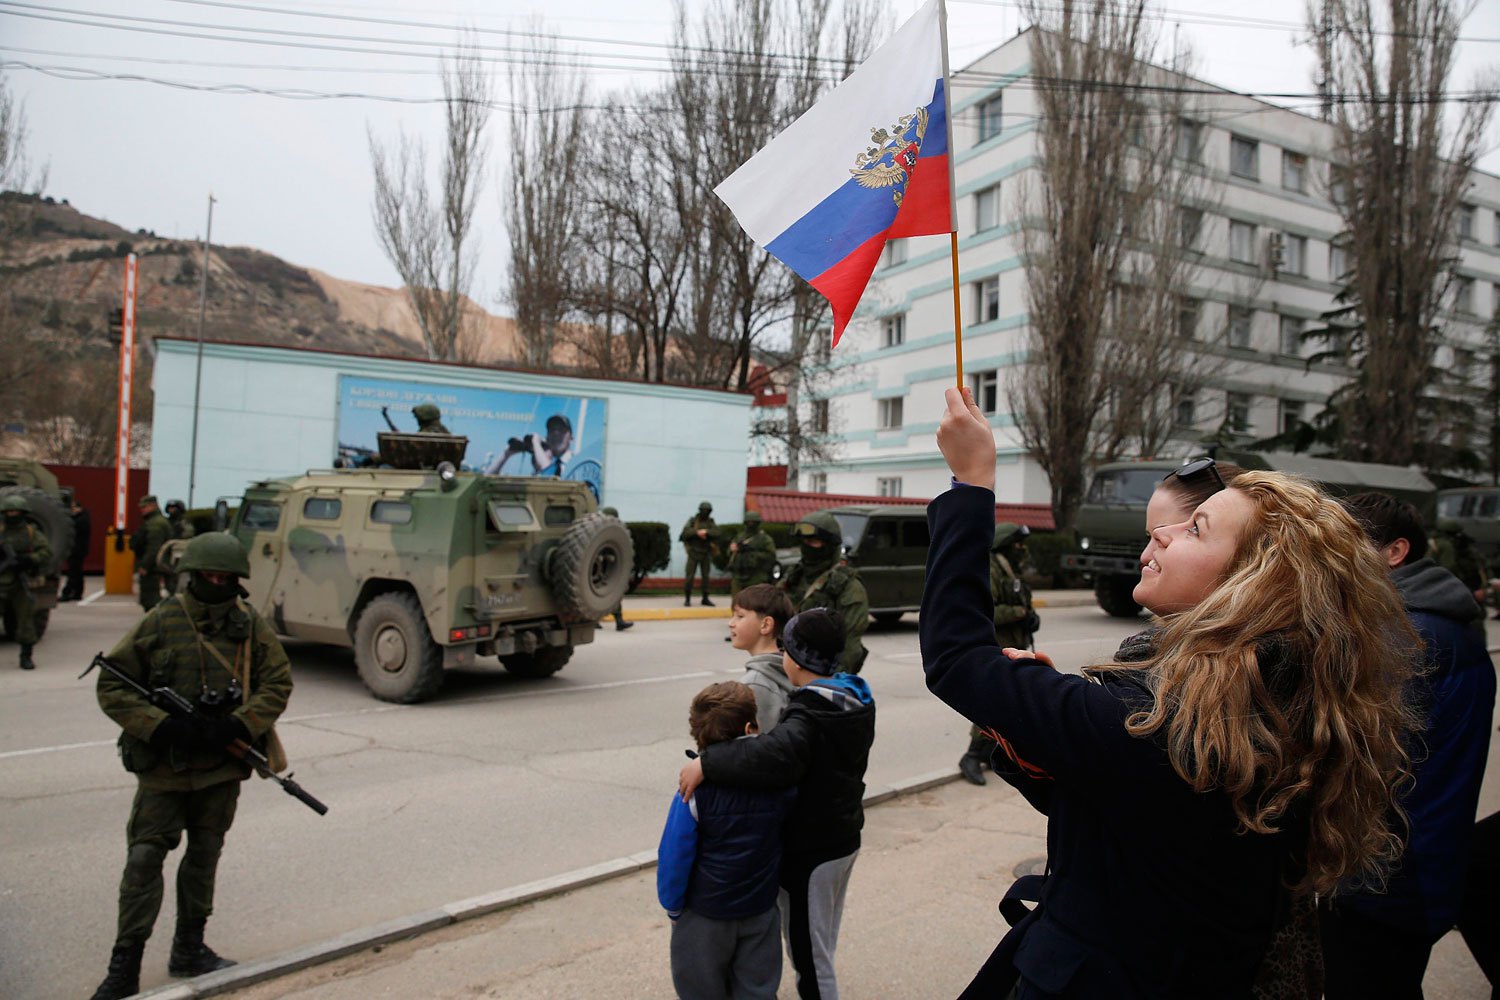 A woman waves a Russian flag as armed servicemen wait near Russian army vehicles outside a Ukrainian border guard post in the Crimean town of Balaclava, March 1, 2014.